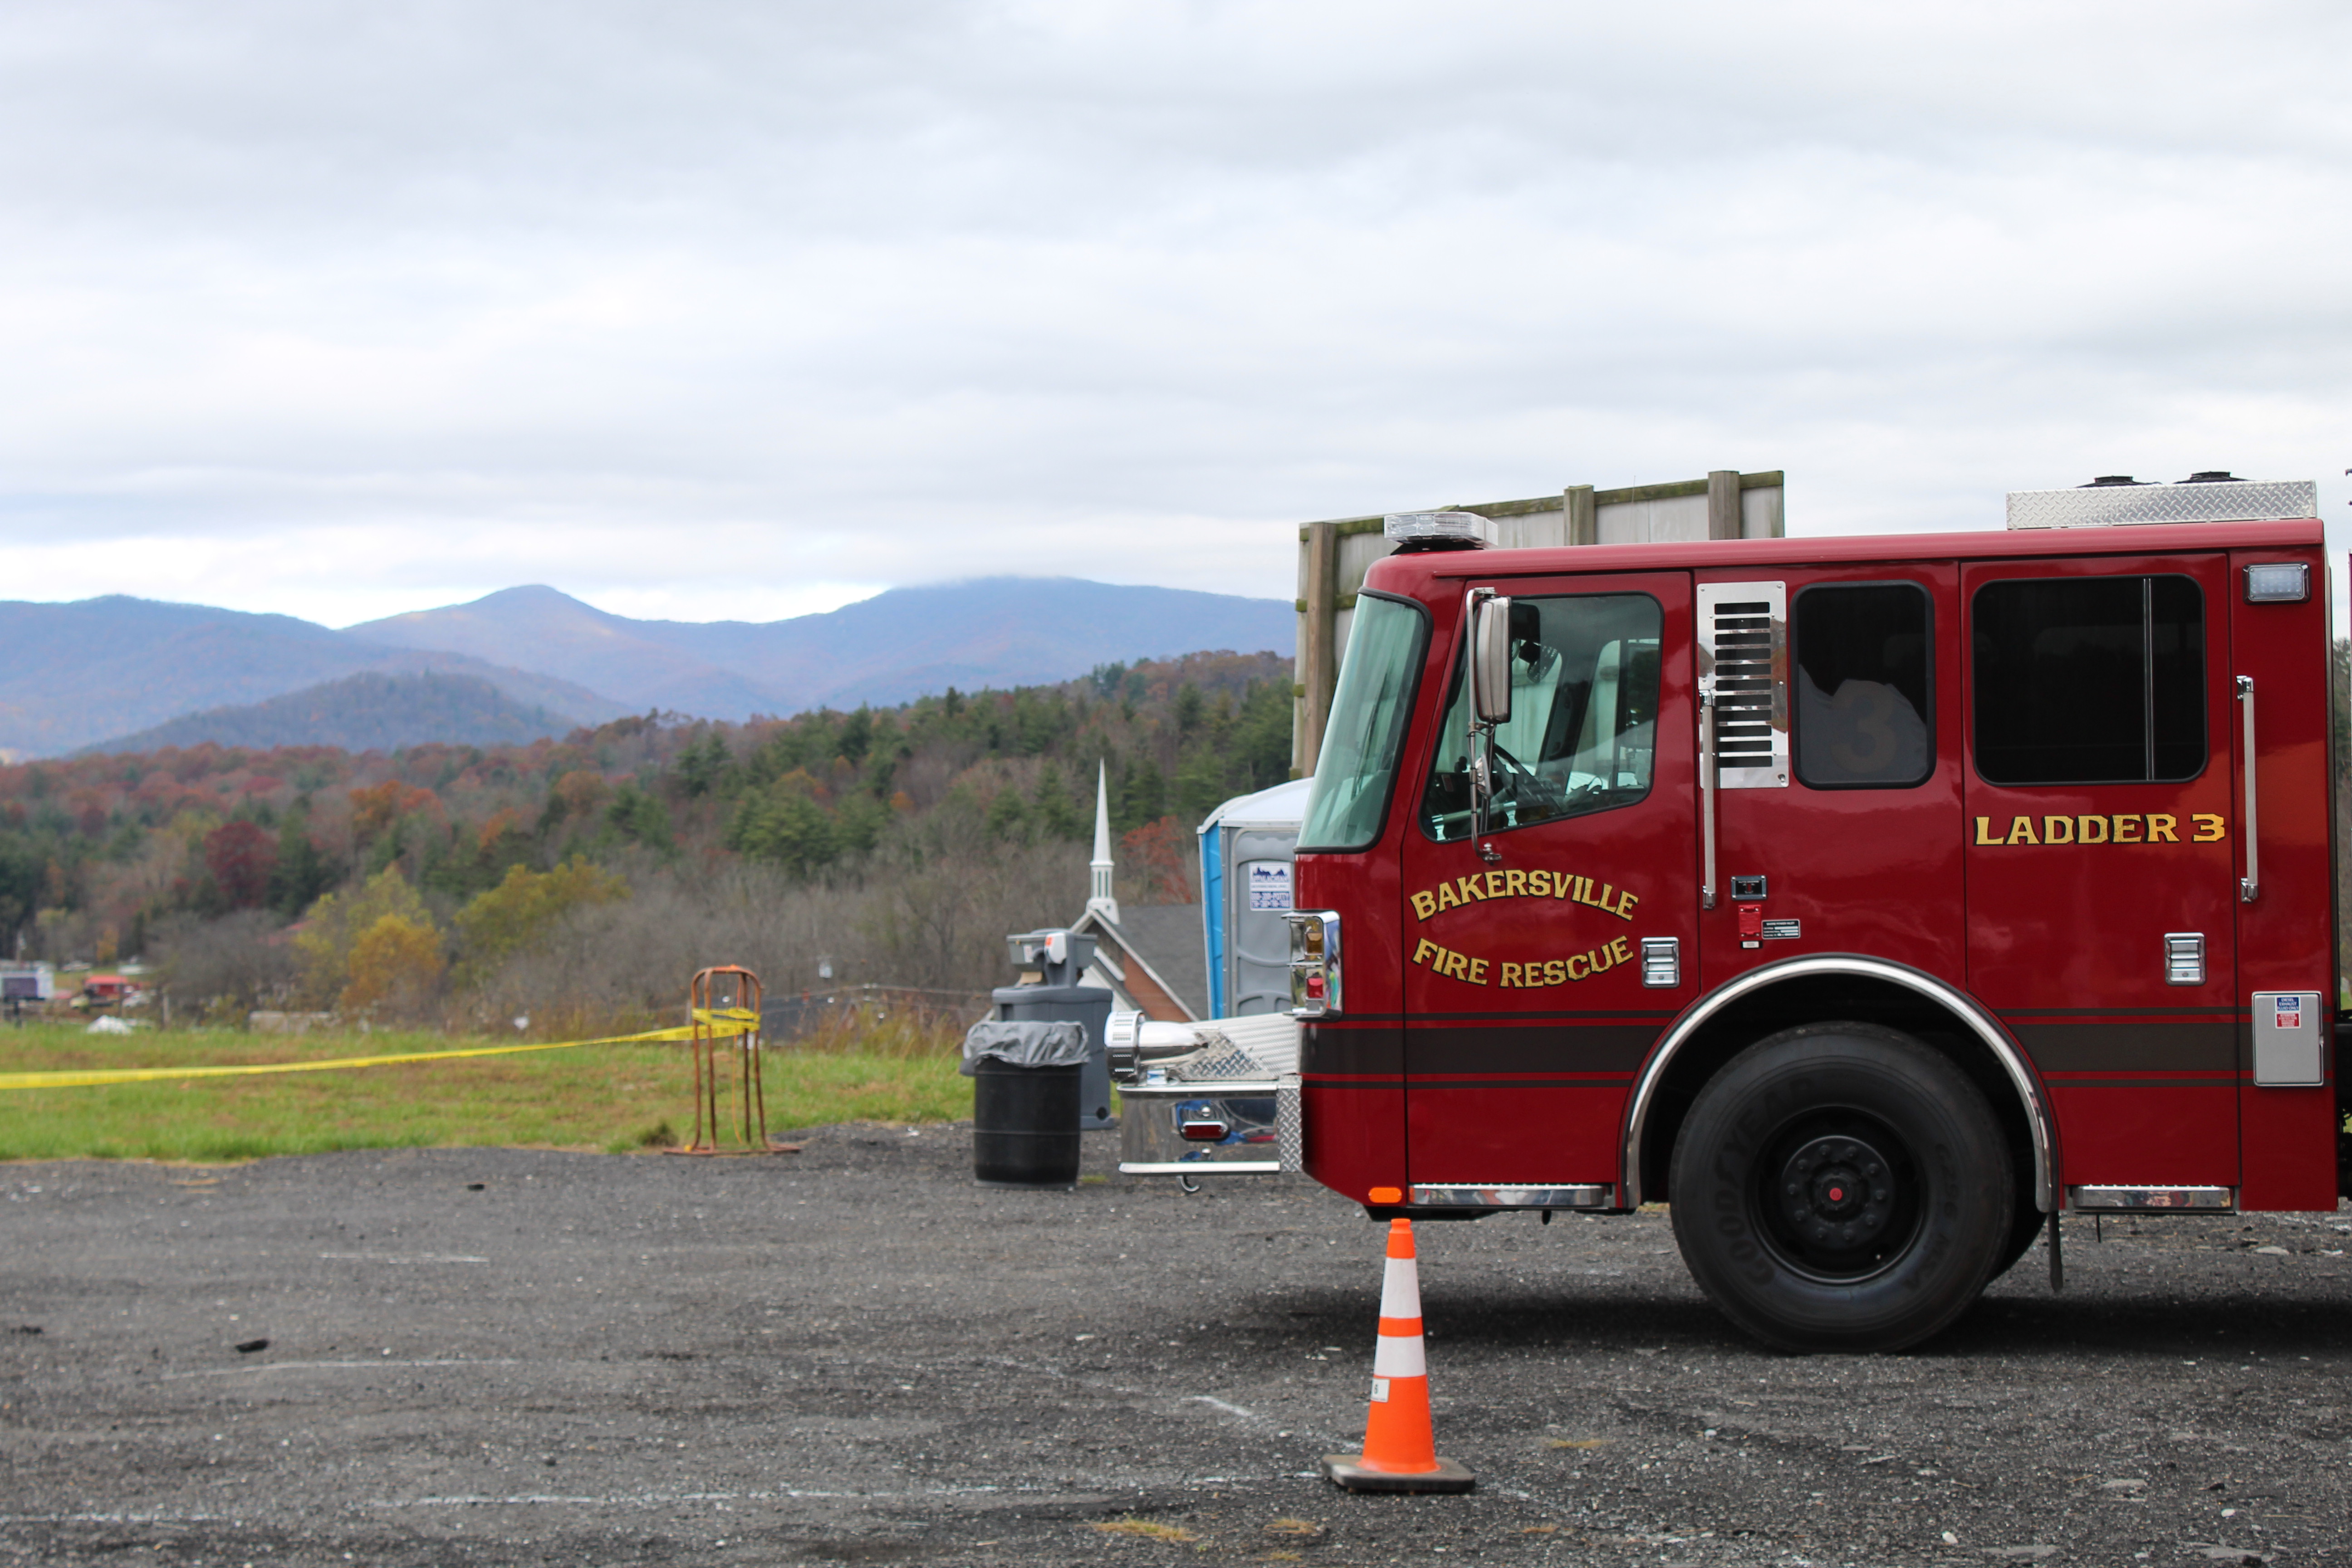  A Bakersville Fire and Rescue truck sits on display at the second annual Remember When Day. The free event was a fundraiser with proceeds benefiting the Mitchell County Firefighters Association. (MNJ Photo/Juliana Walker)